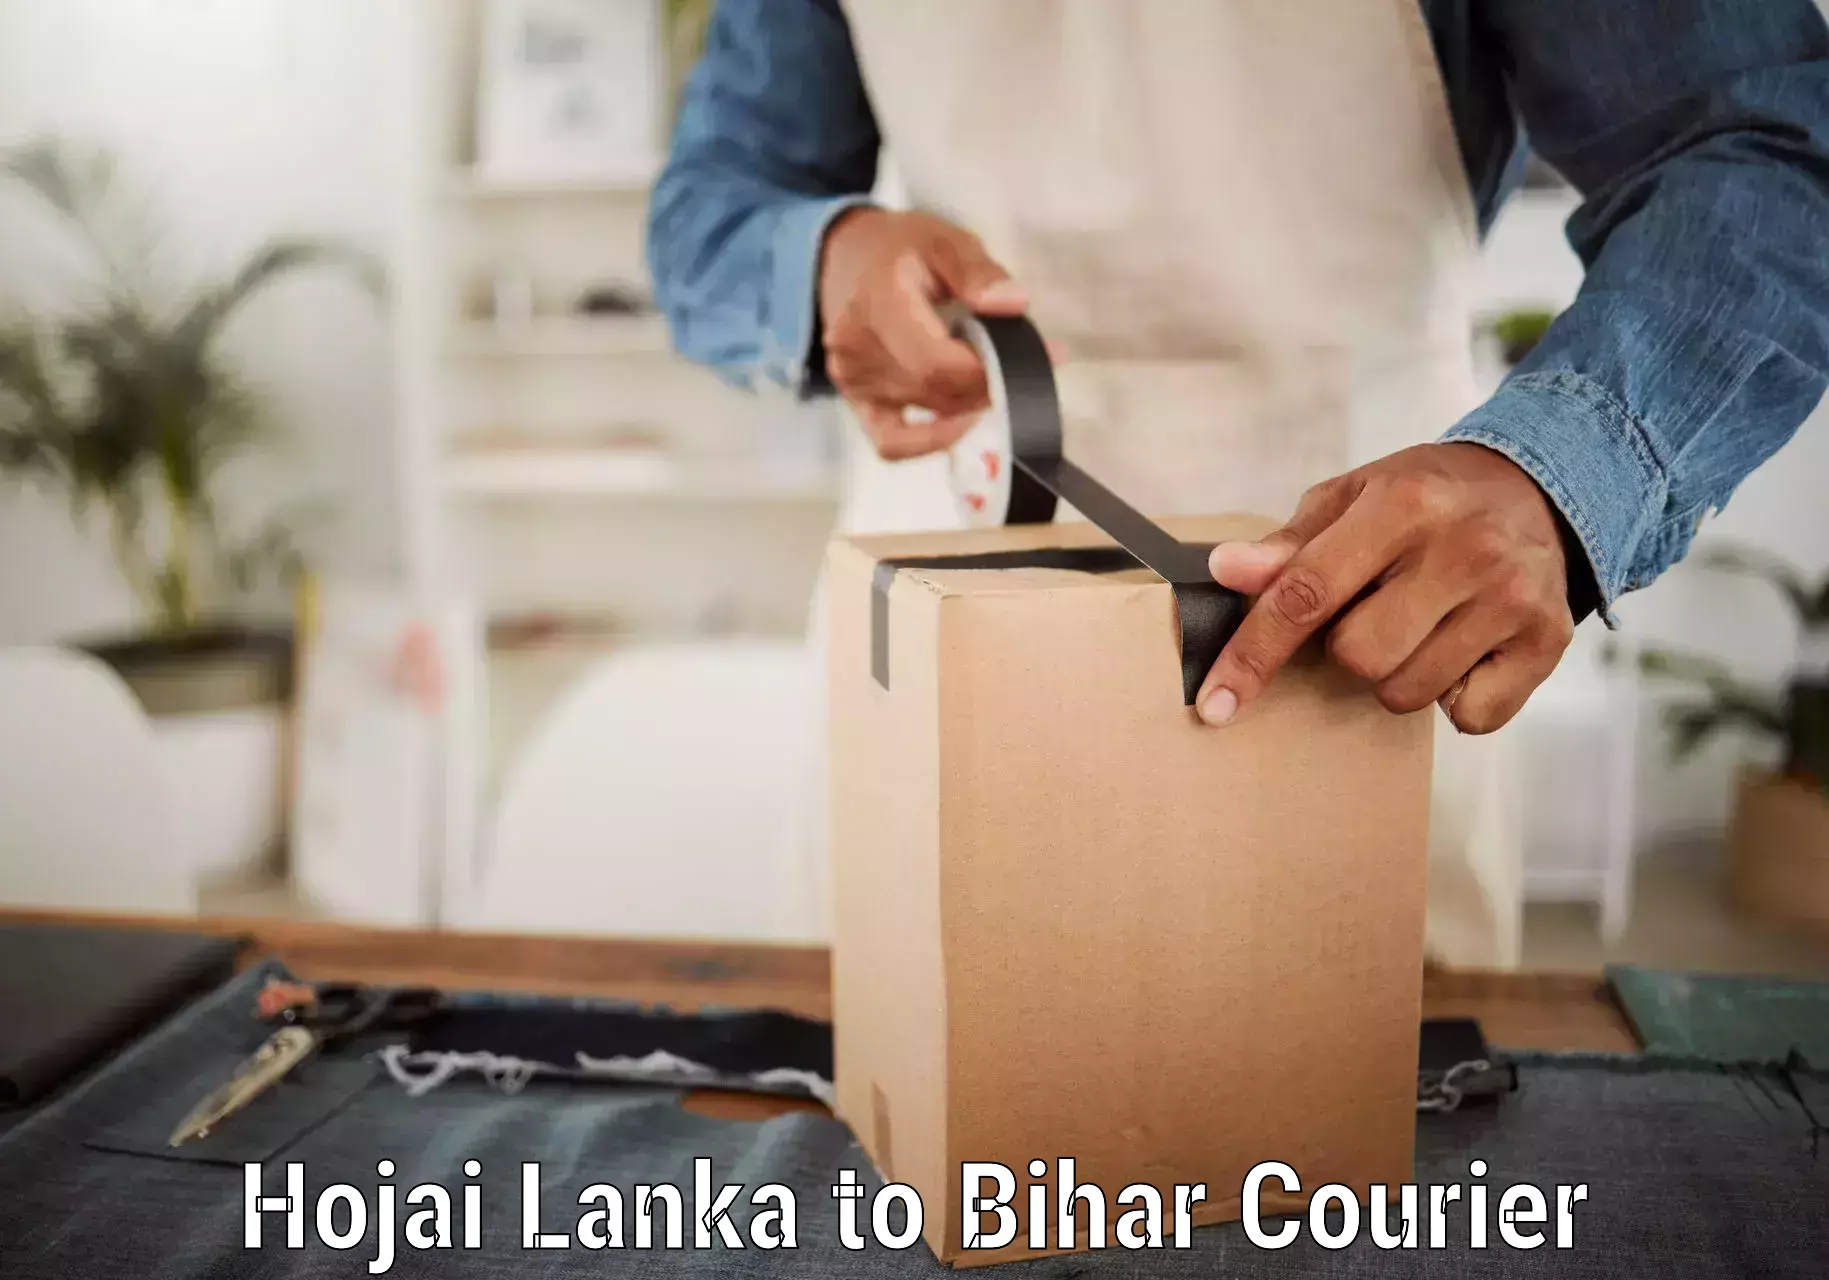 Large-scale shipping solutions Hojai Lanka to Kamtaul